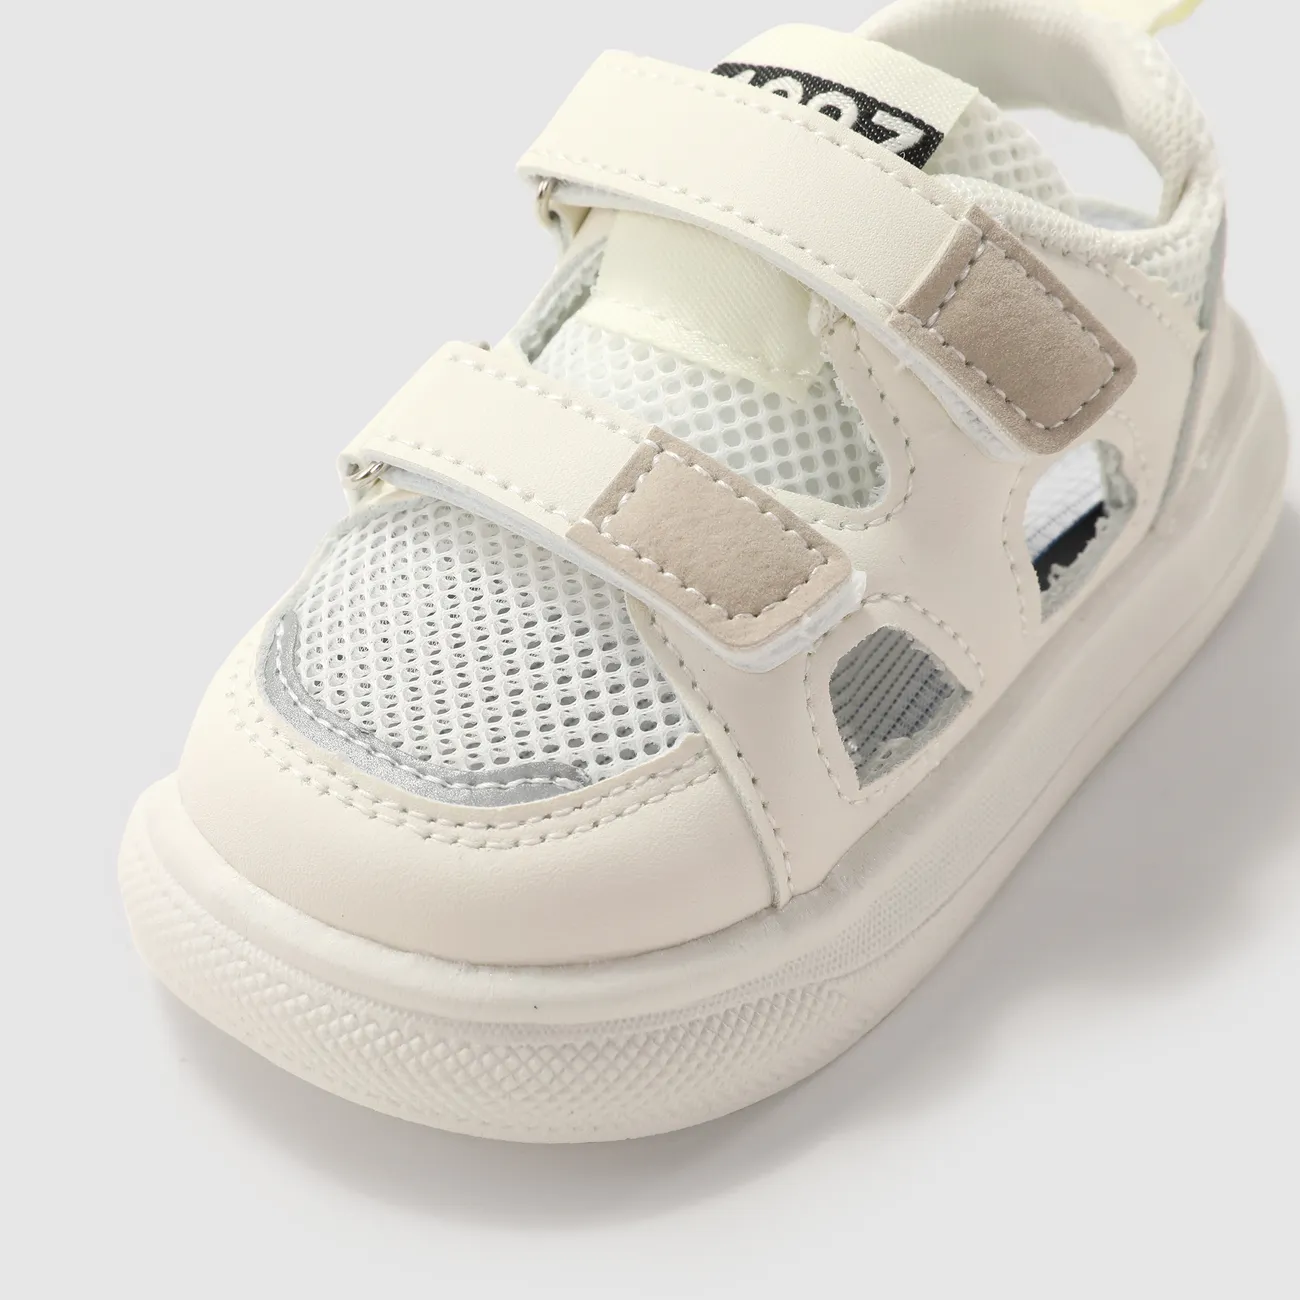 Toddler/Kids Girl/Boy Casual Velcro Hollow Out Mesh Sandals White big image 1